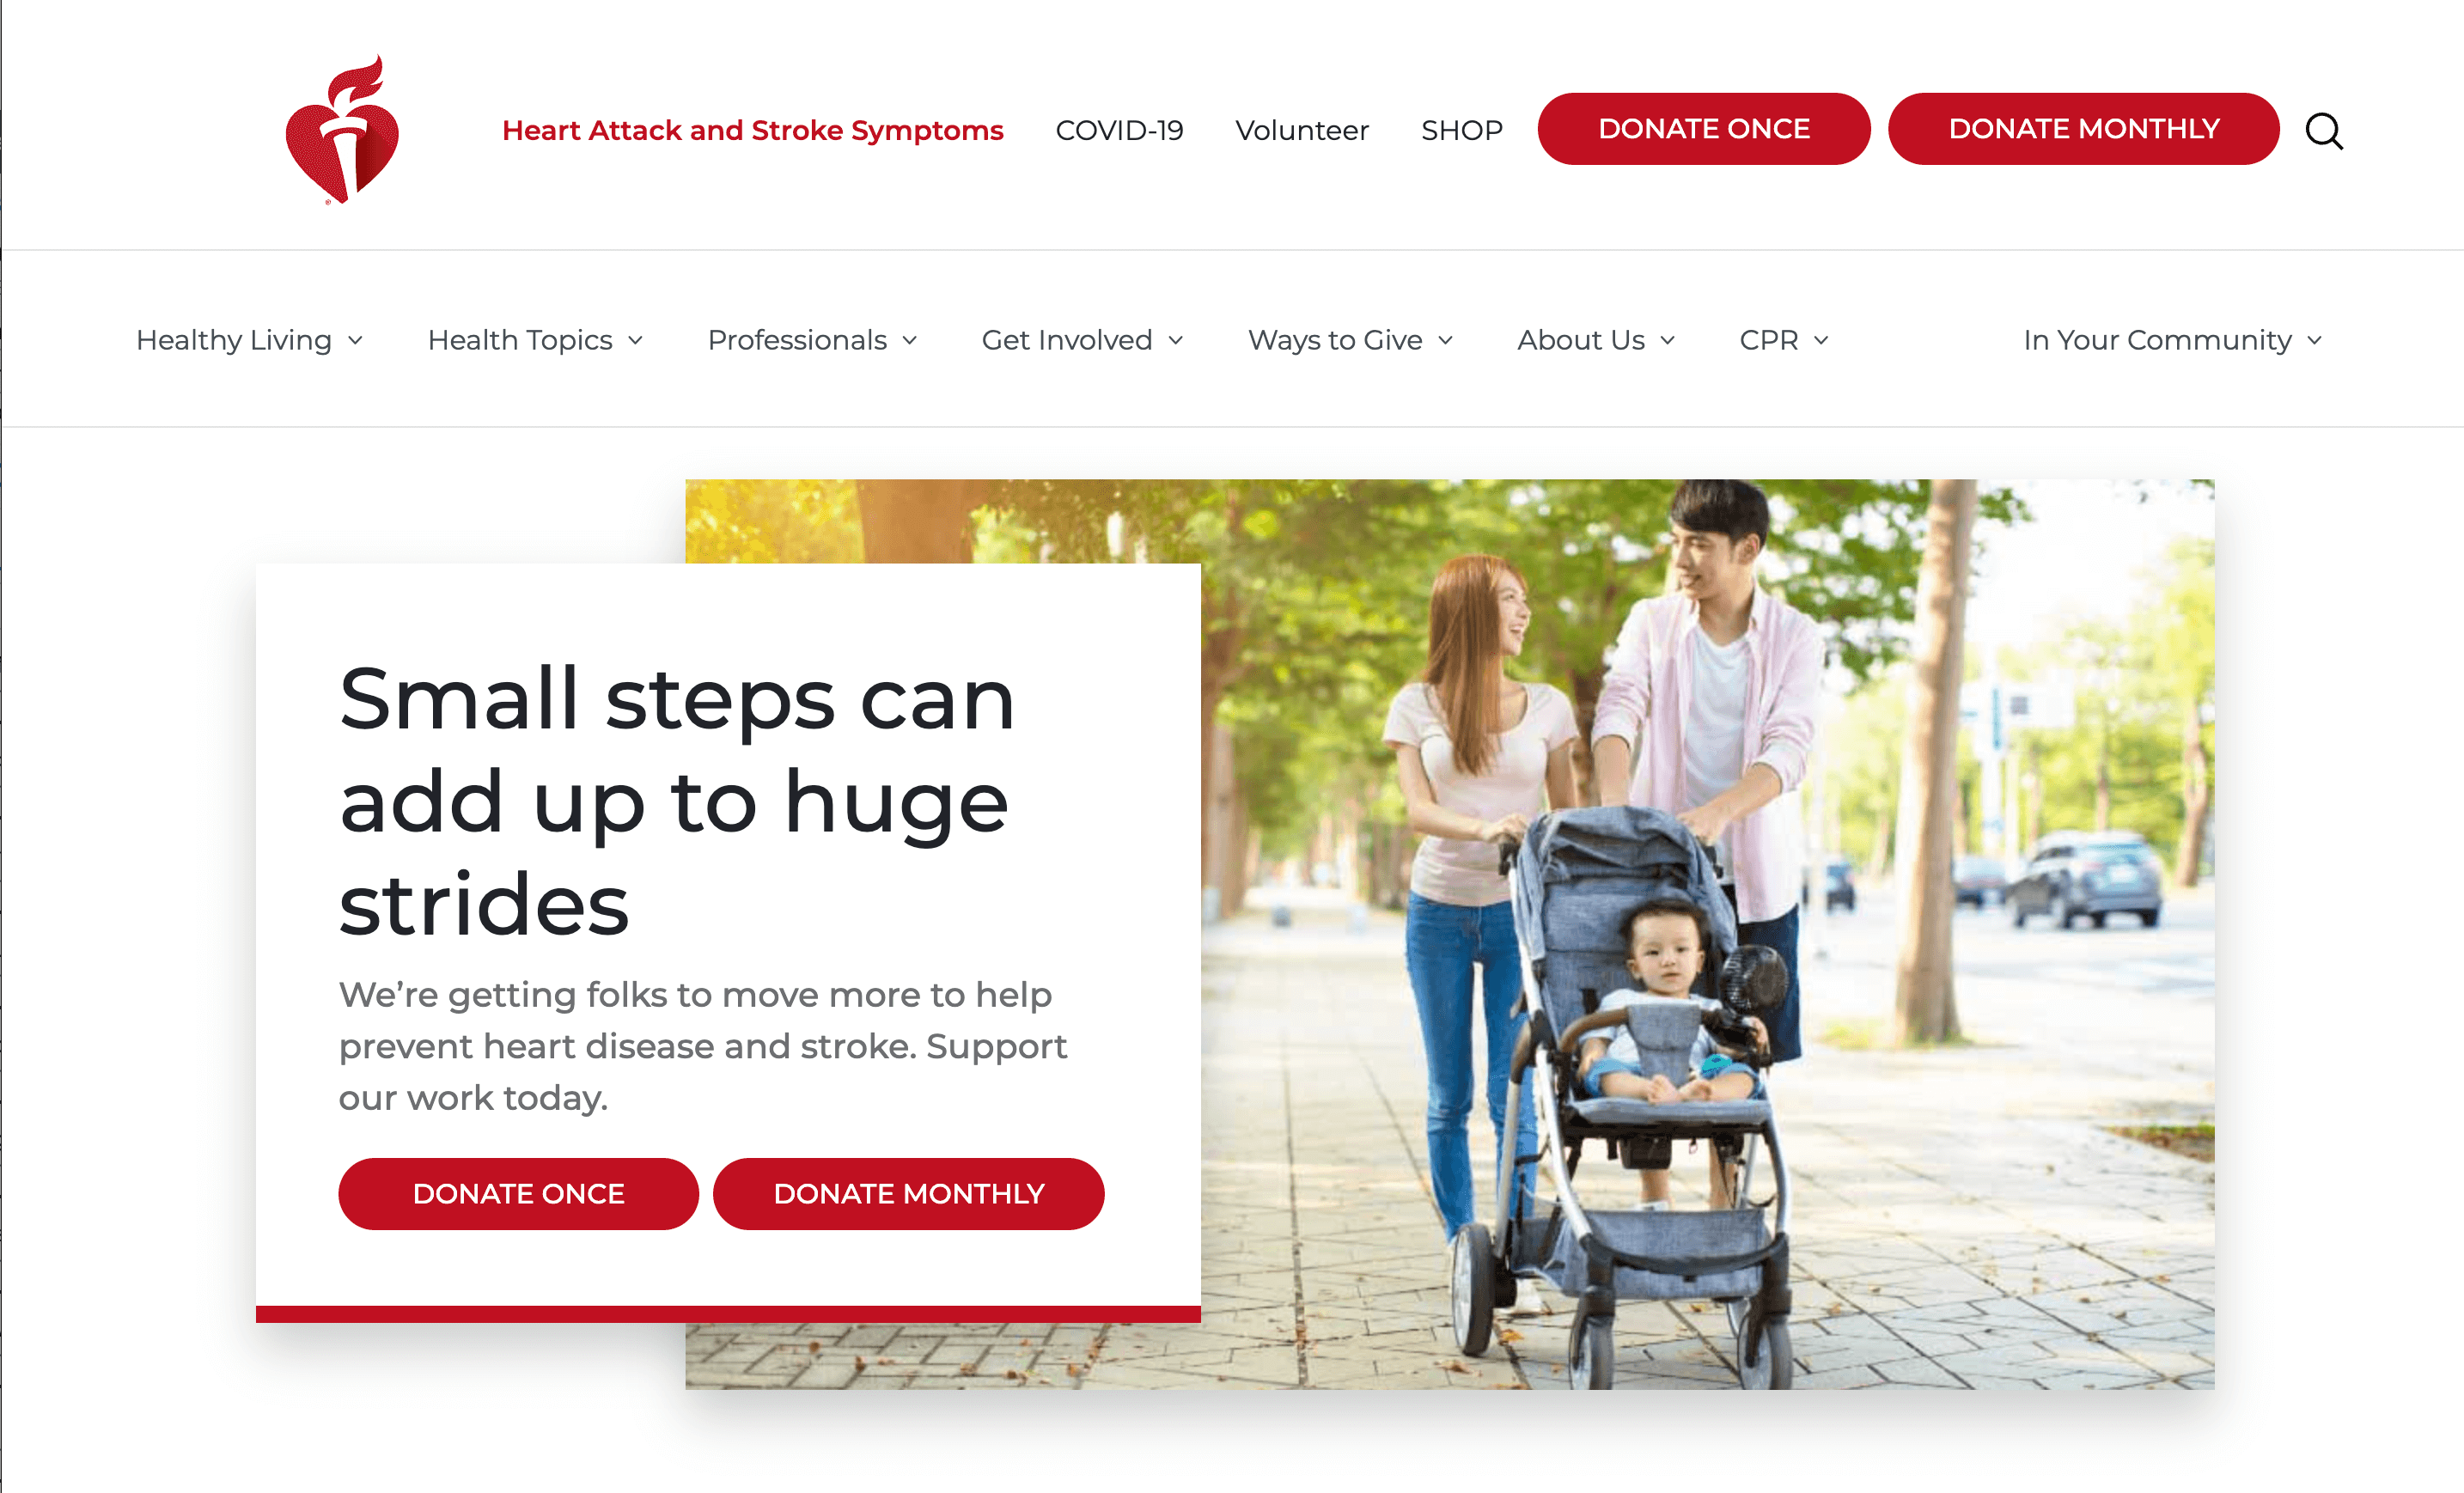 The American Heart Association's homepage